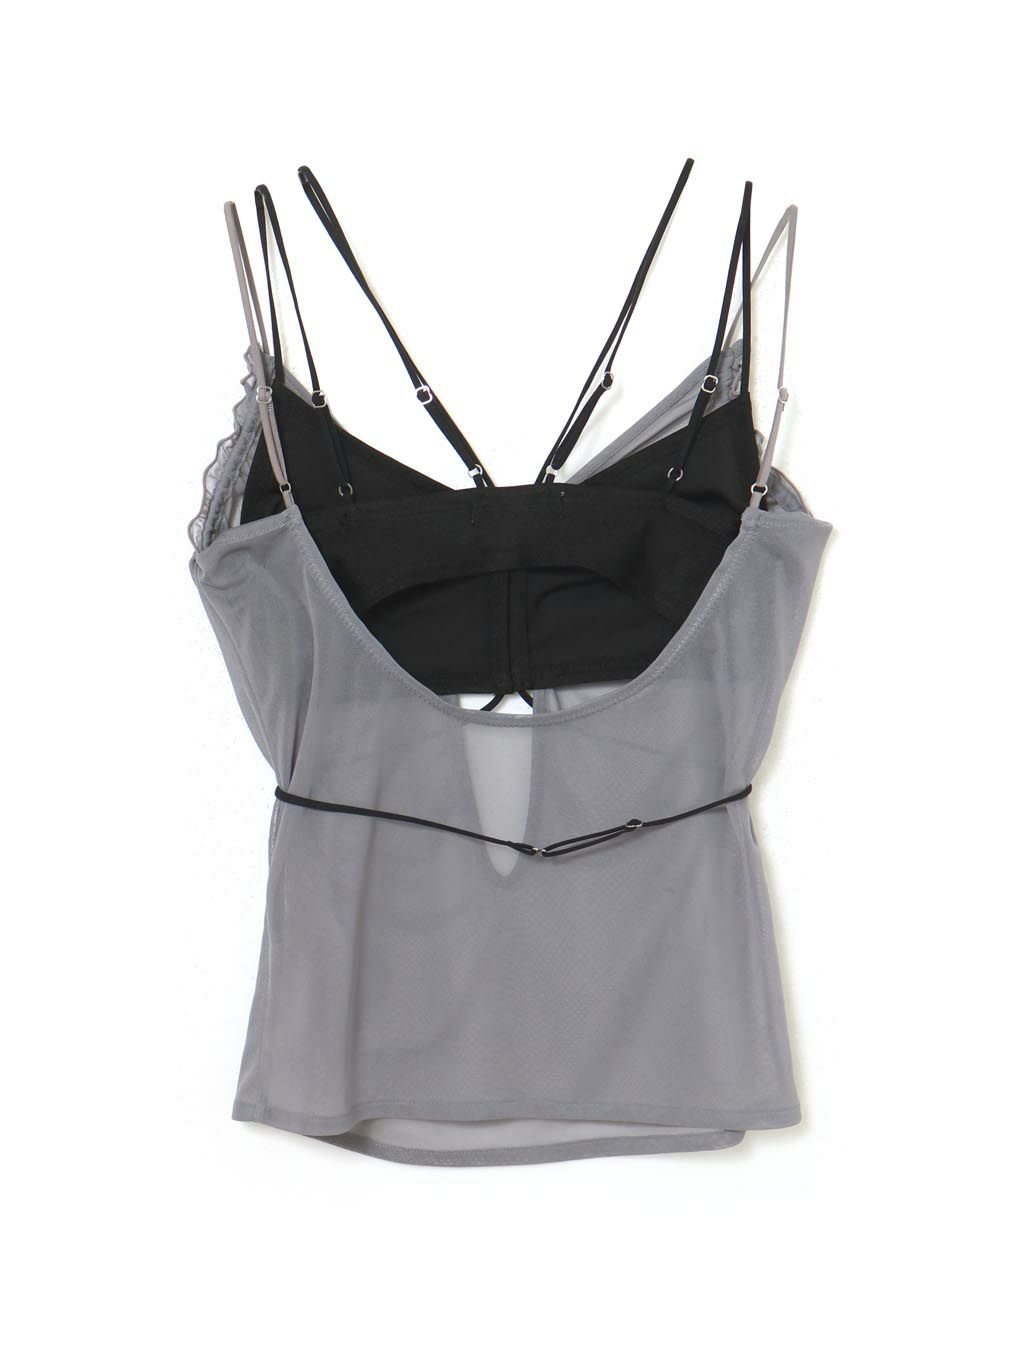 sheer cover camisole melt the lady | www.promoartadvertising.com